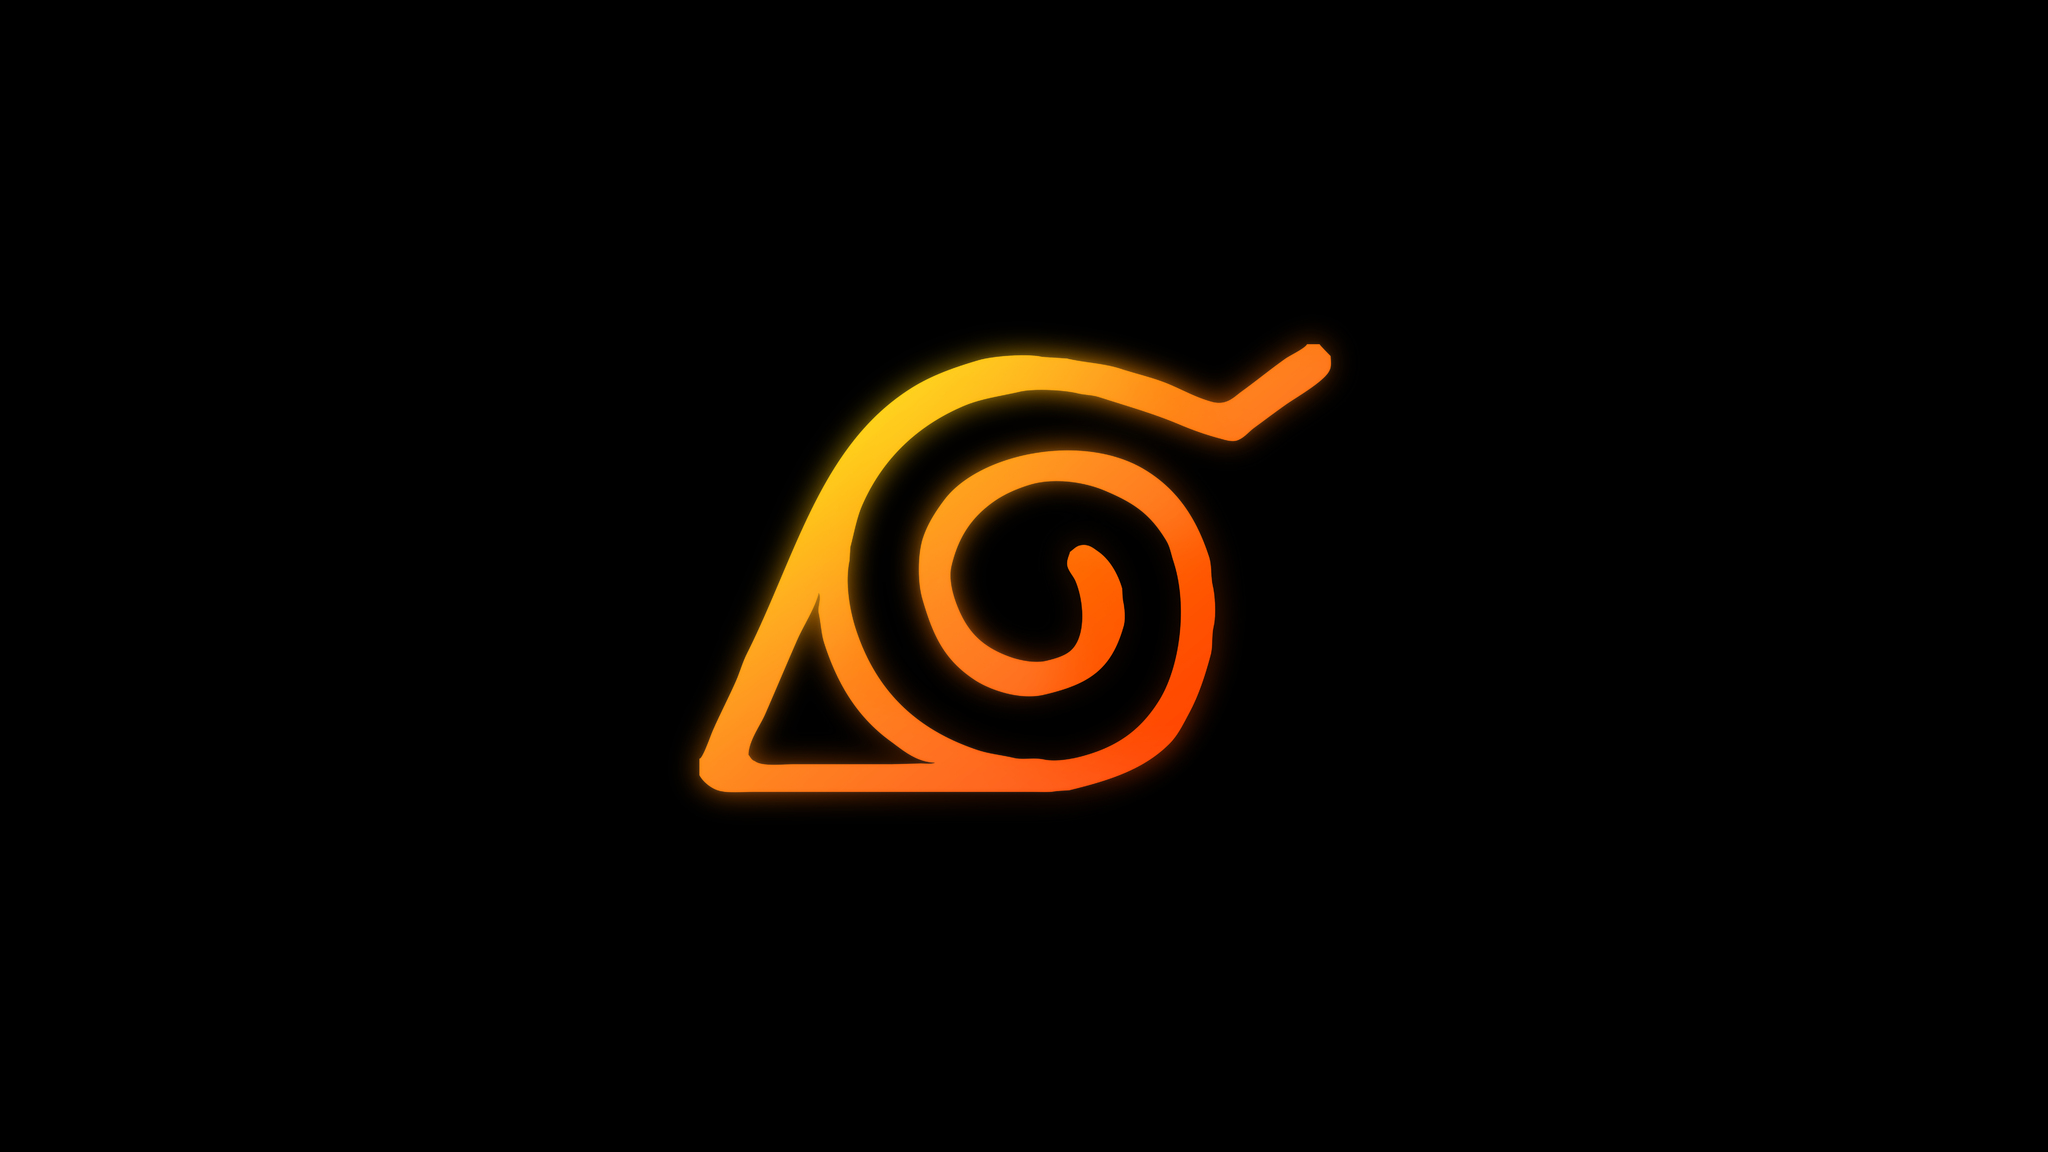 Naruto Logo Anime 8k 2048x1152 Resolution HD 4k Wallpaper, Image, Background, Photo and Picture